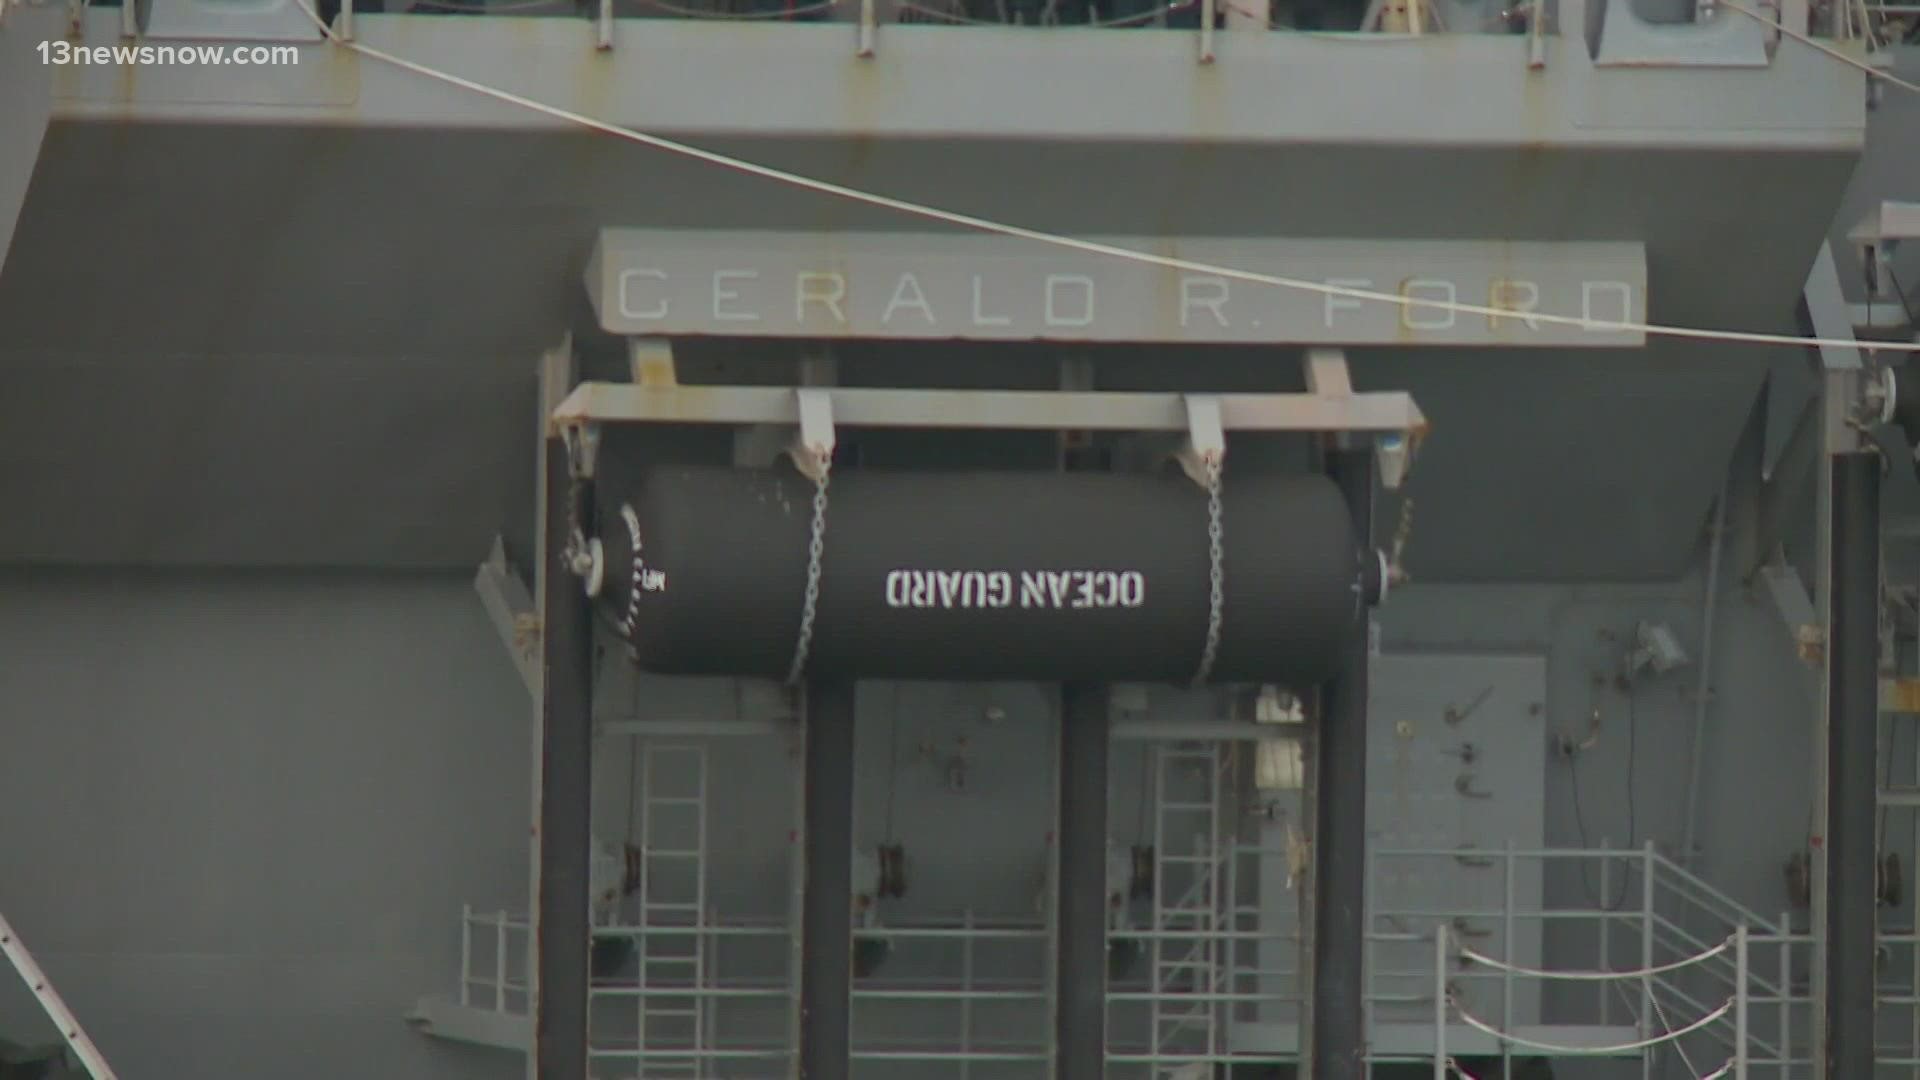 The ship was built by Newport News Shipbuilding, and the Navy has finished testing and certifying 11 advanced weapons elevators.